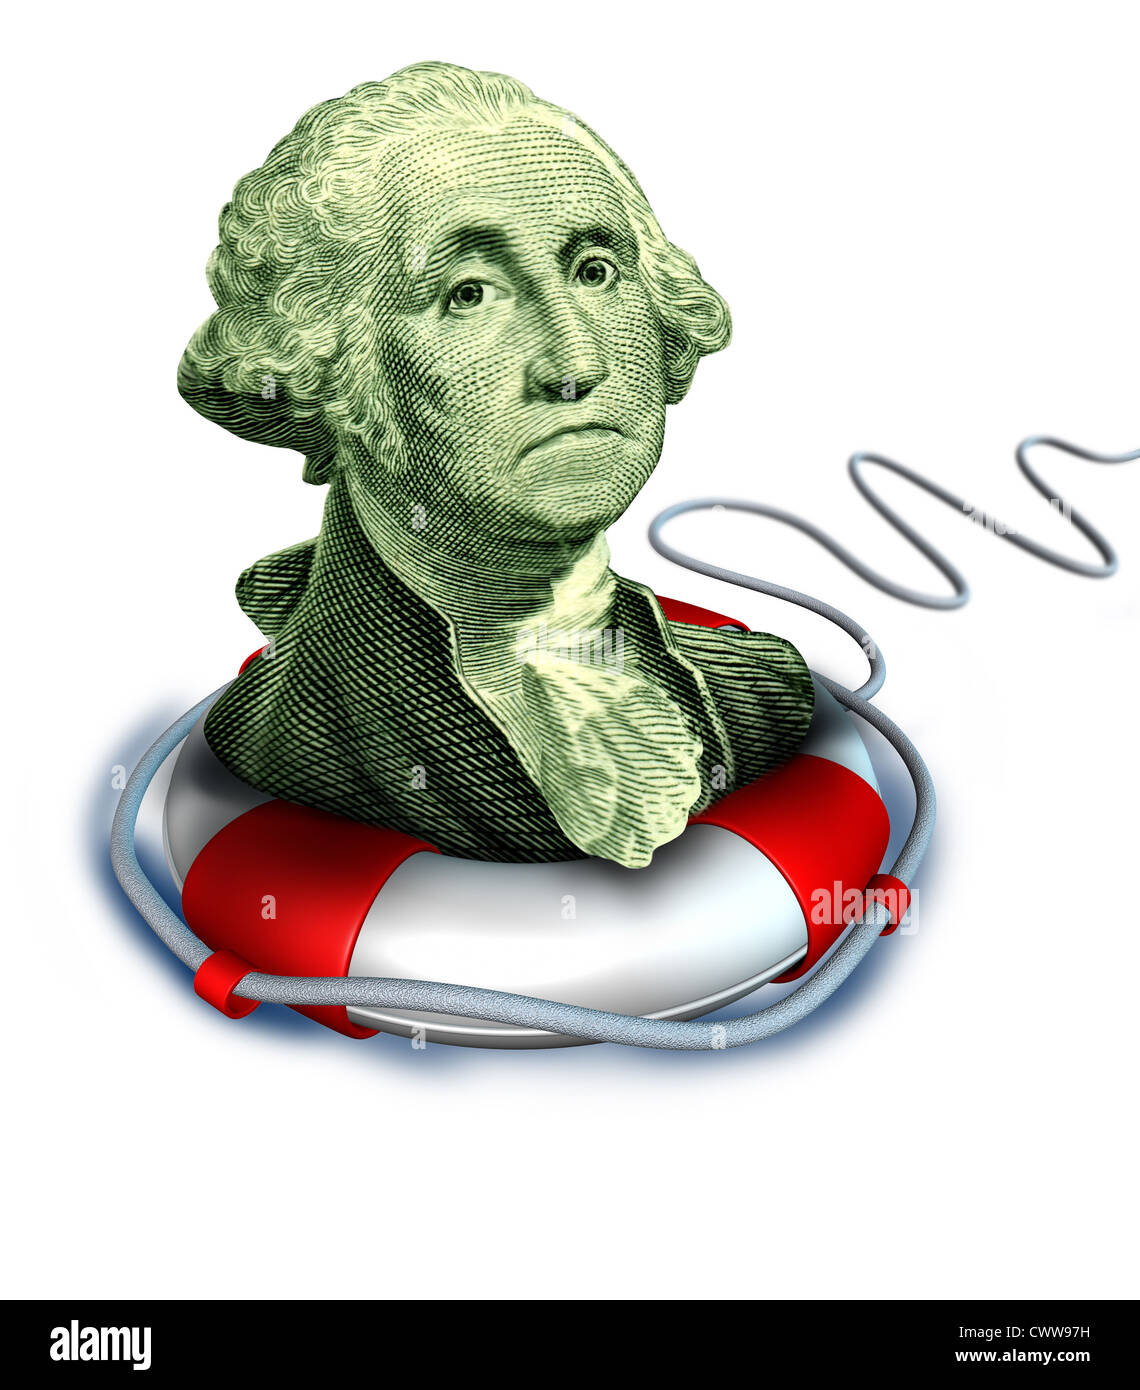 Drowning dollar bill symbol featuring the vintage portrait of George Washington with a life preserver saving the downgraded American currency during a dangerous recesion and U.S. economy. Stock Photo